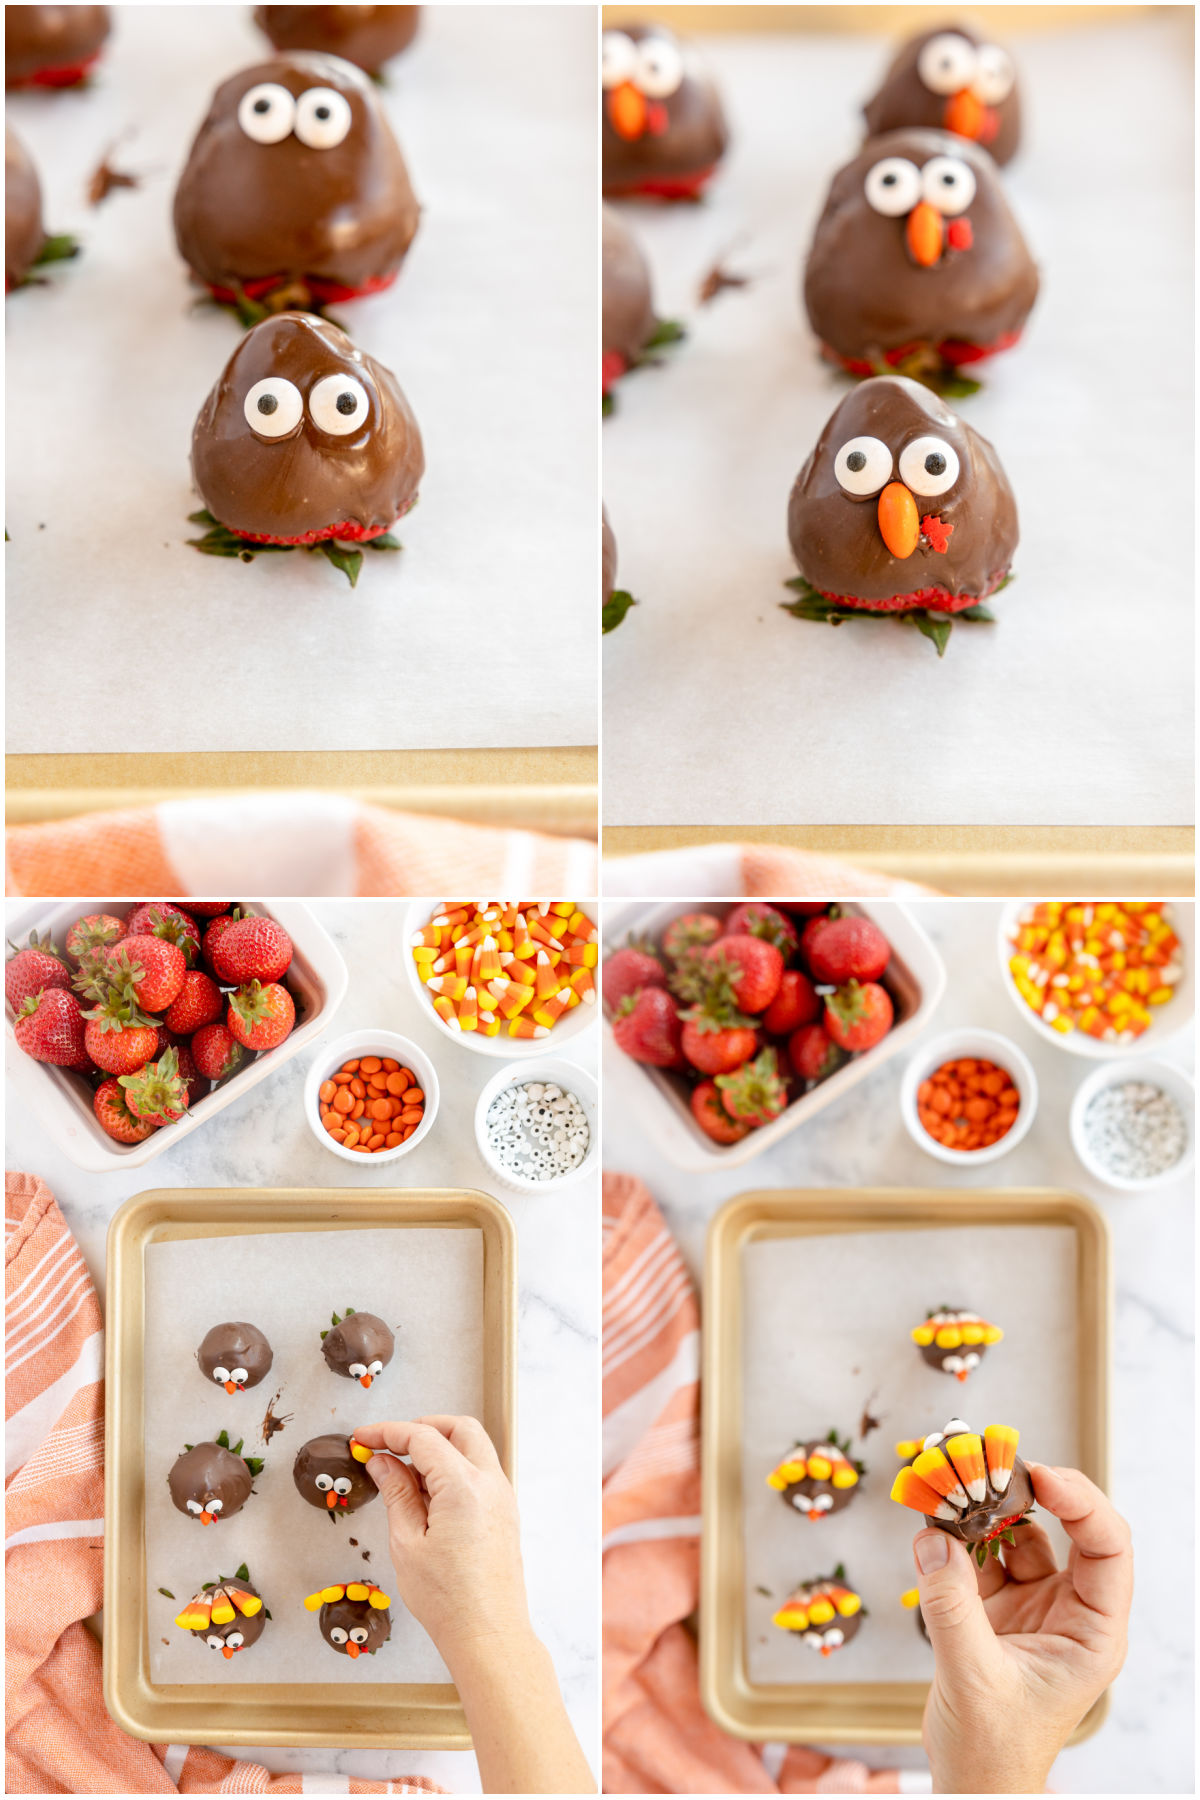 collage of images showing how to make chocolate covered strawberry penguins